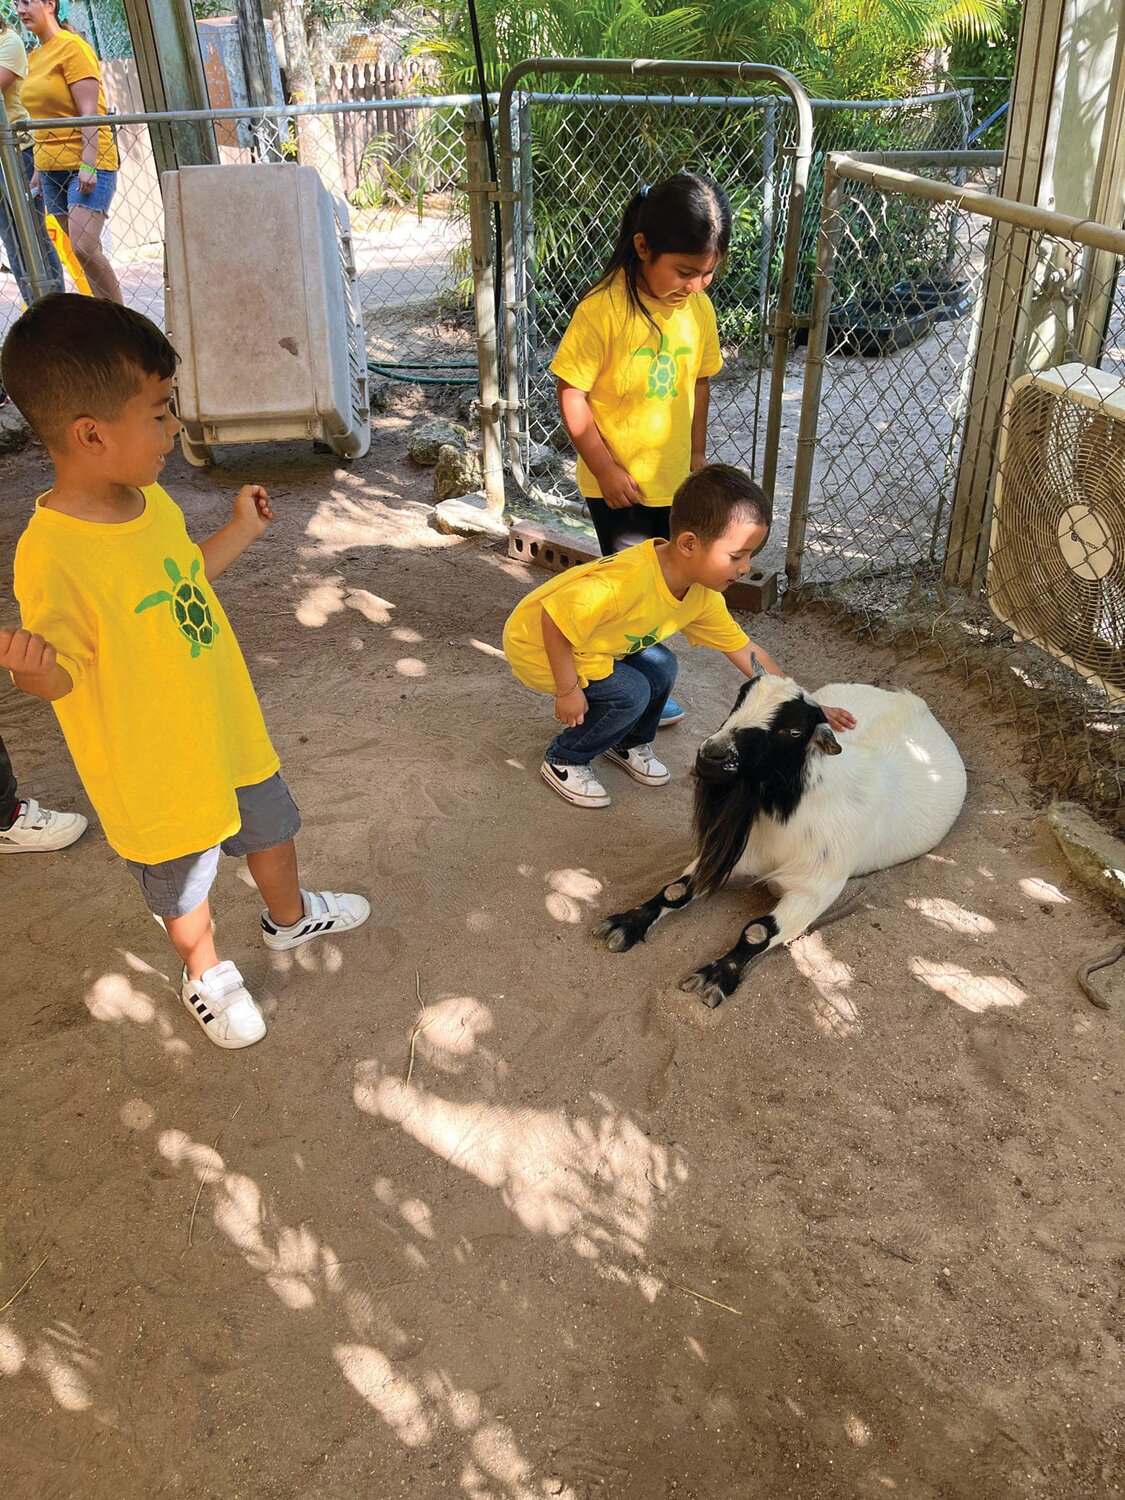 FORT MYERS -- LaBelle Elementary School Pre-K students enjoyed meeting the animals at Shell Factory on a recent field trip. [Photo courtesy LES]